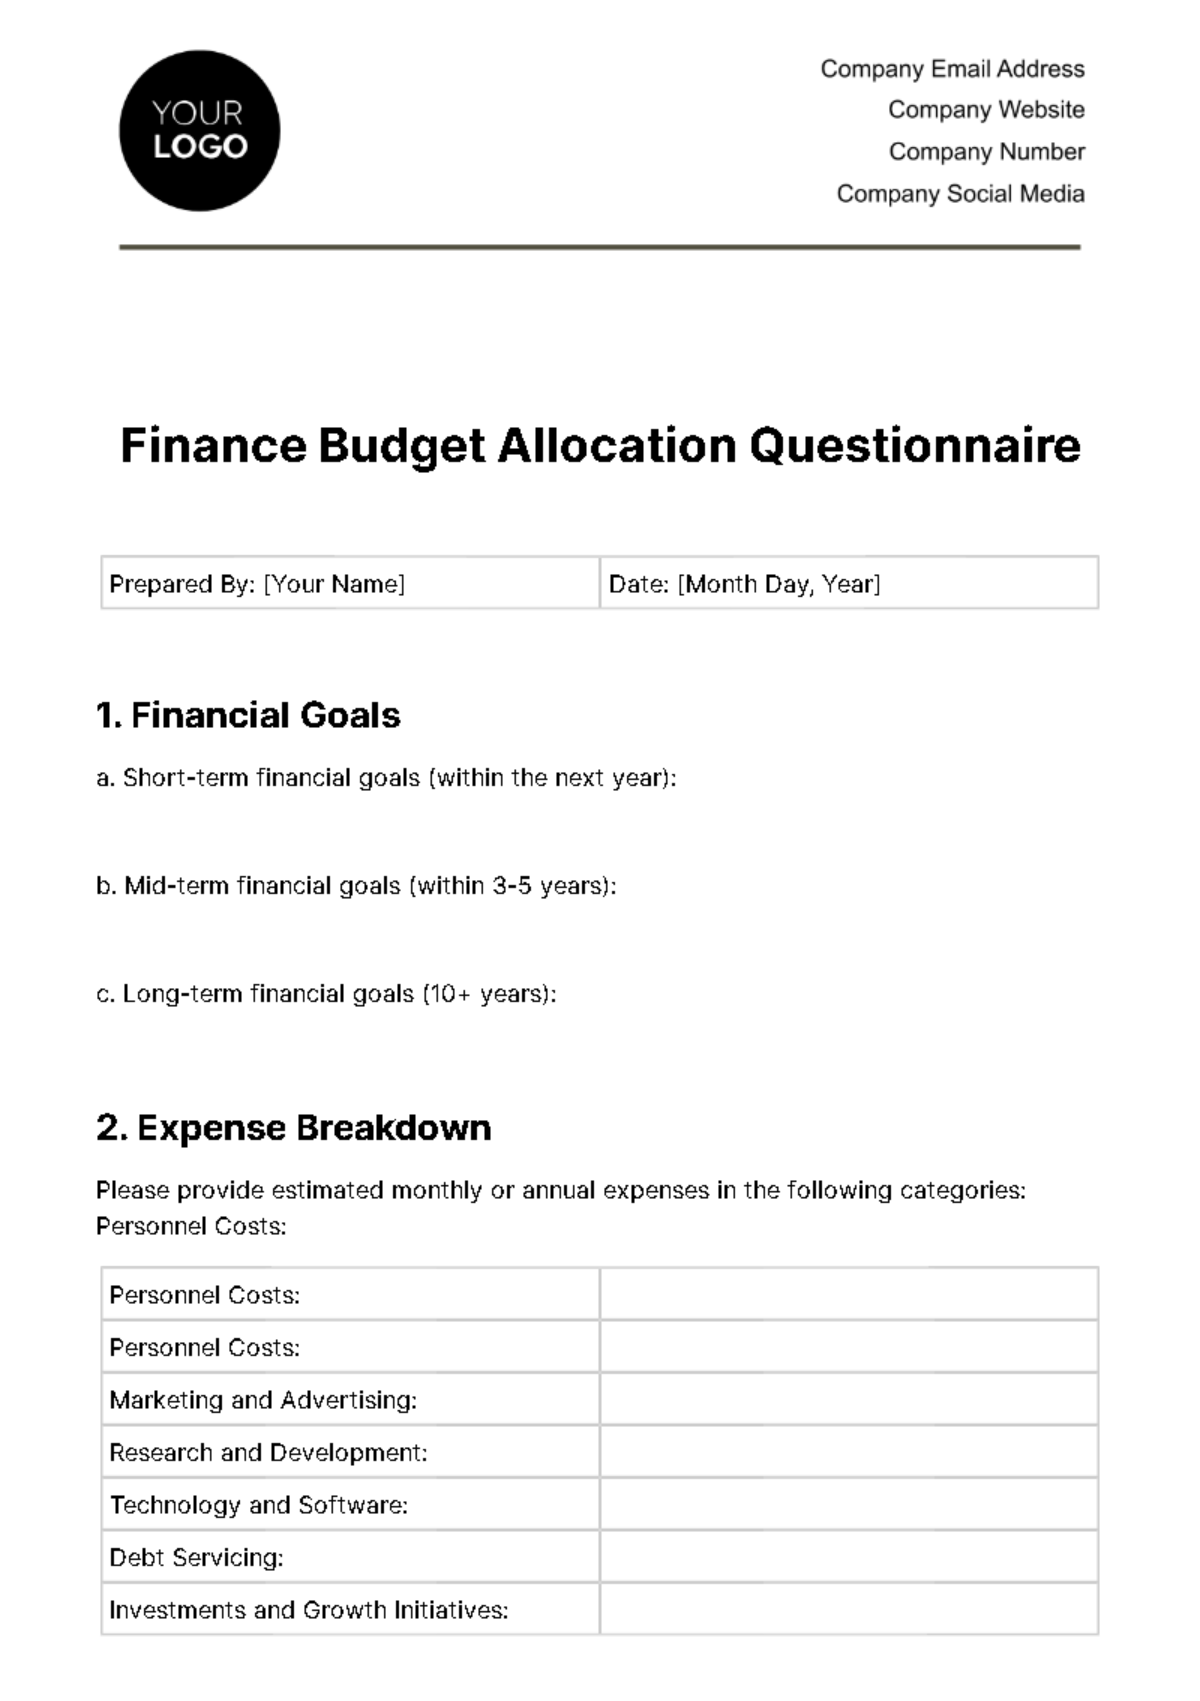 Free Finance Budget Allocation Questionnaire Template